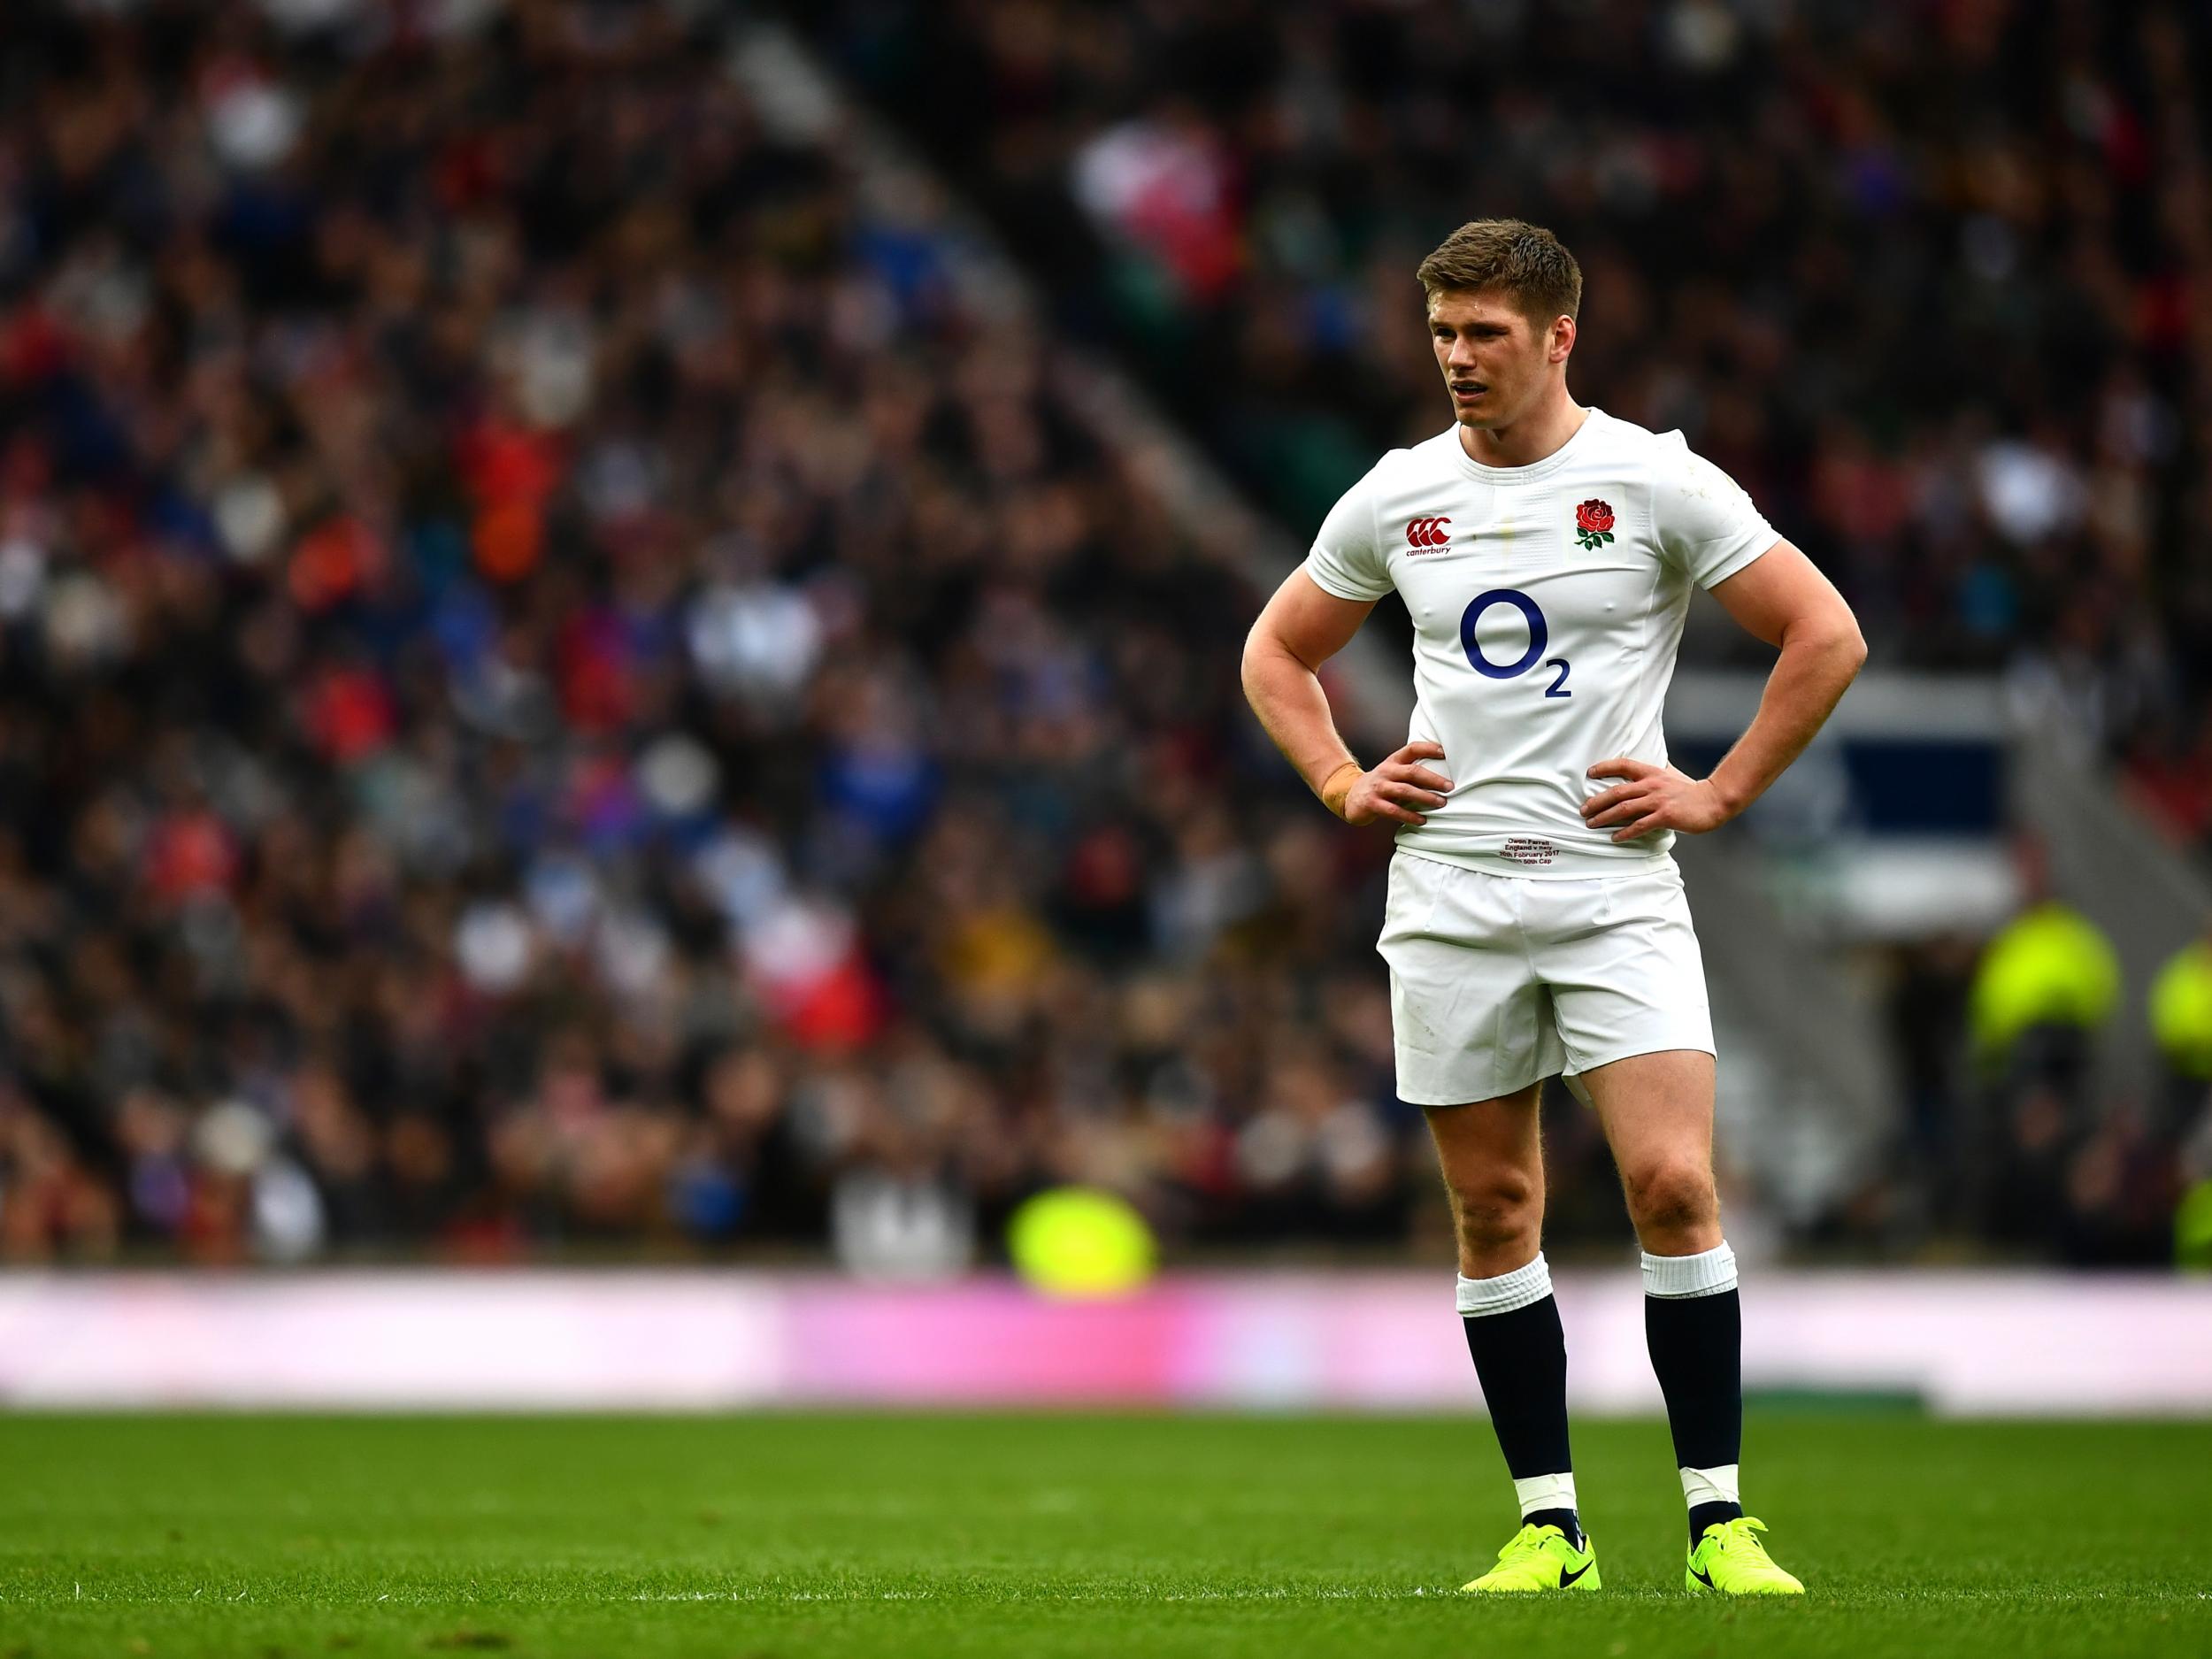 England were made to work hard in their win against Italy